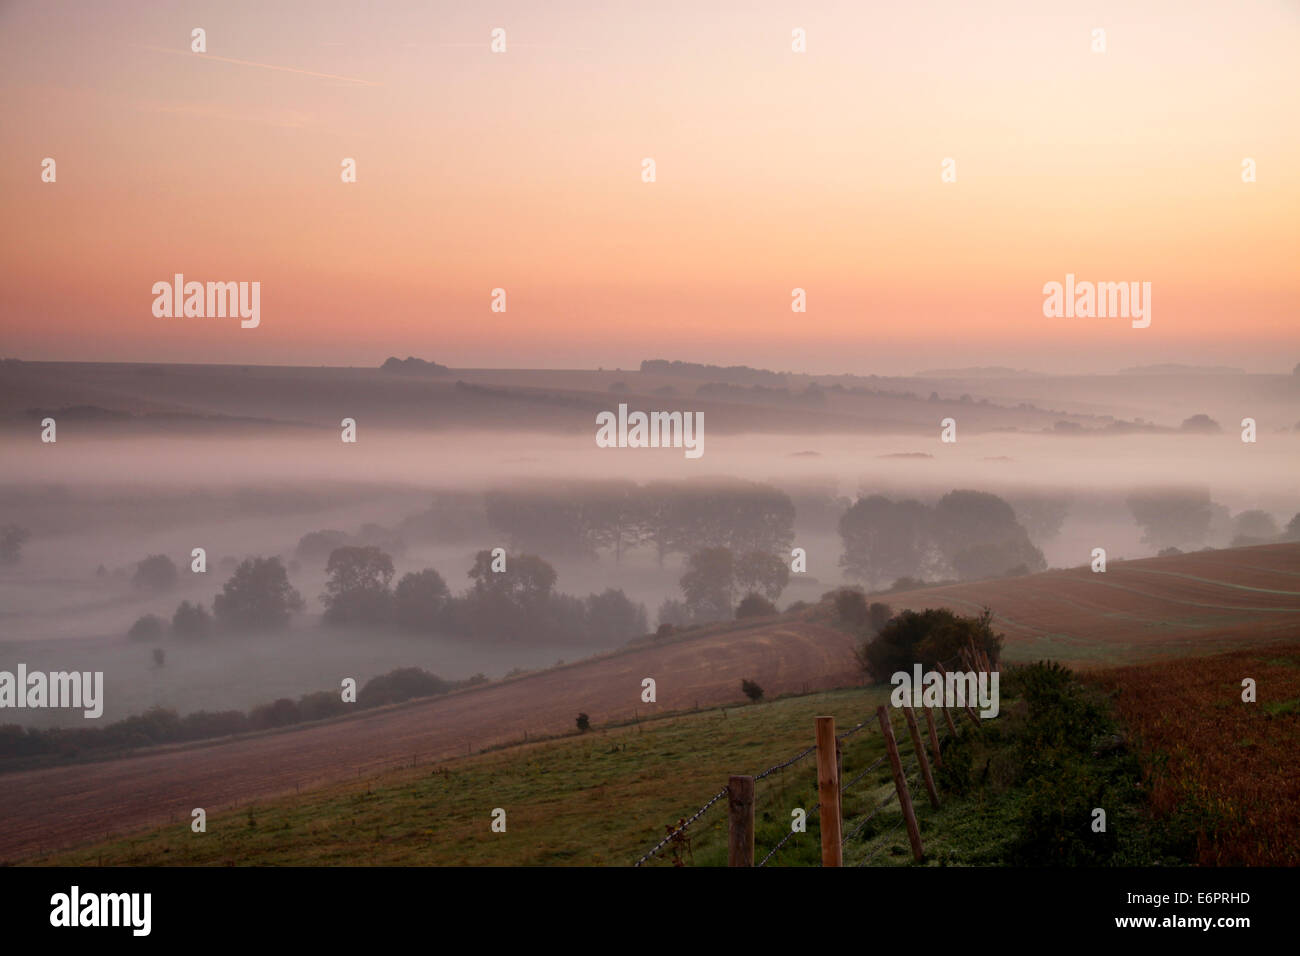 Autumn mist in the Wylye Valley, Wiltshire, England, photographed from Ebsbury Hill near the village of Great Wishford. Stock Photo